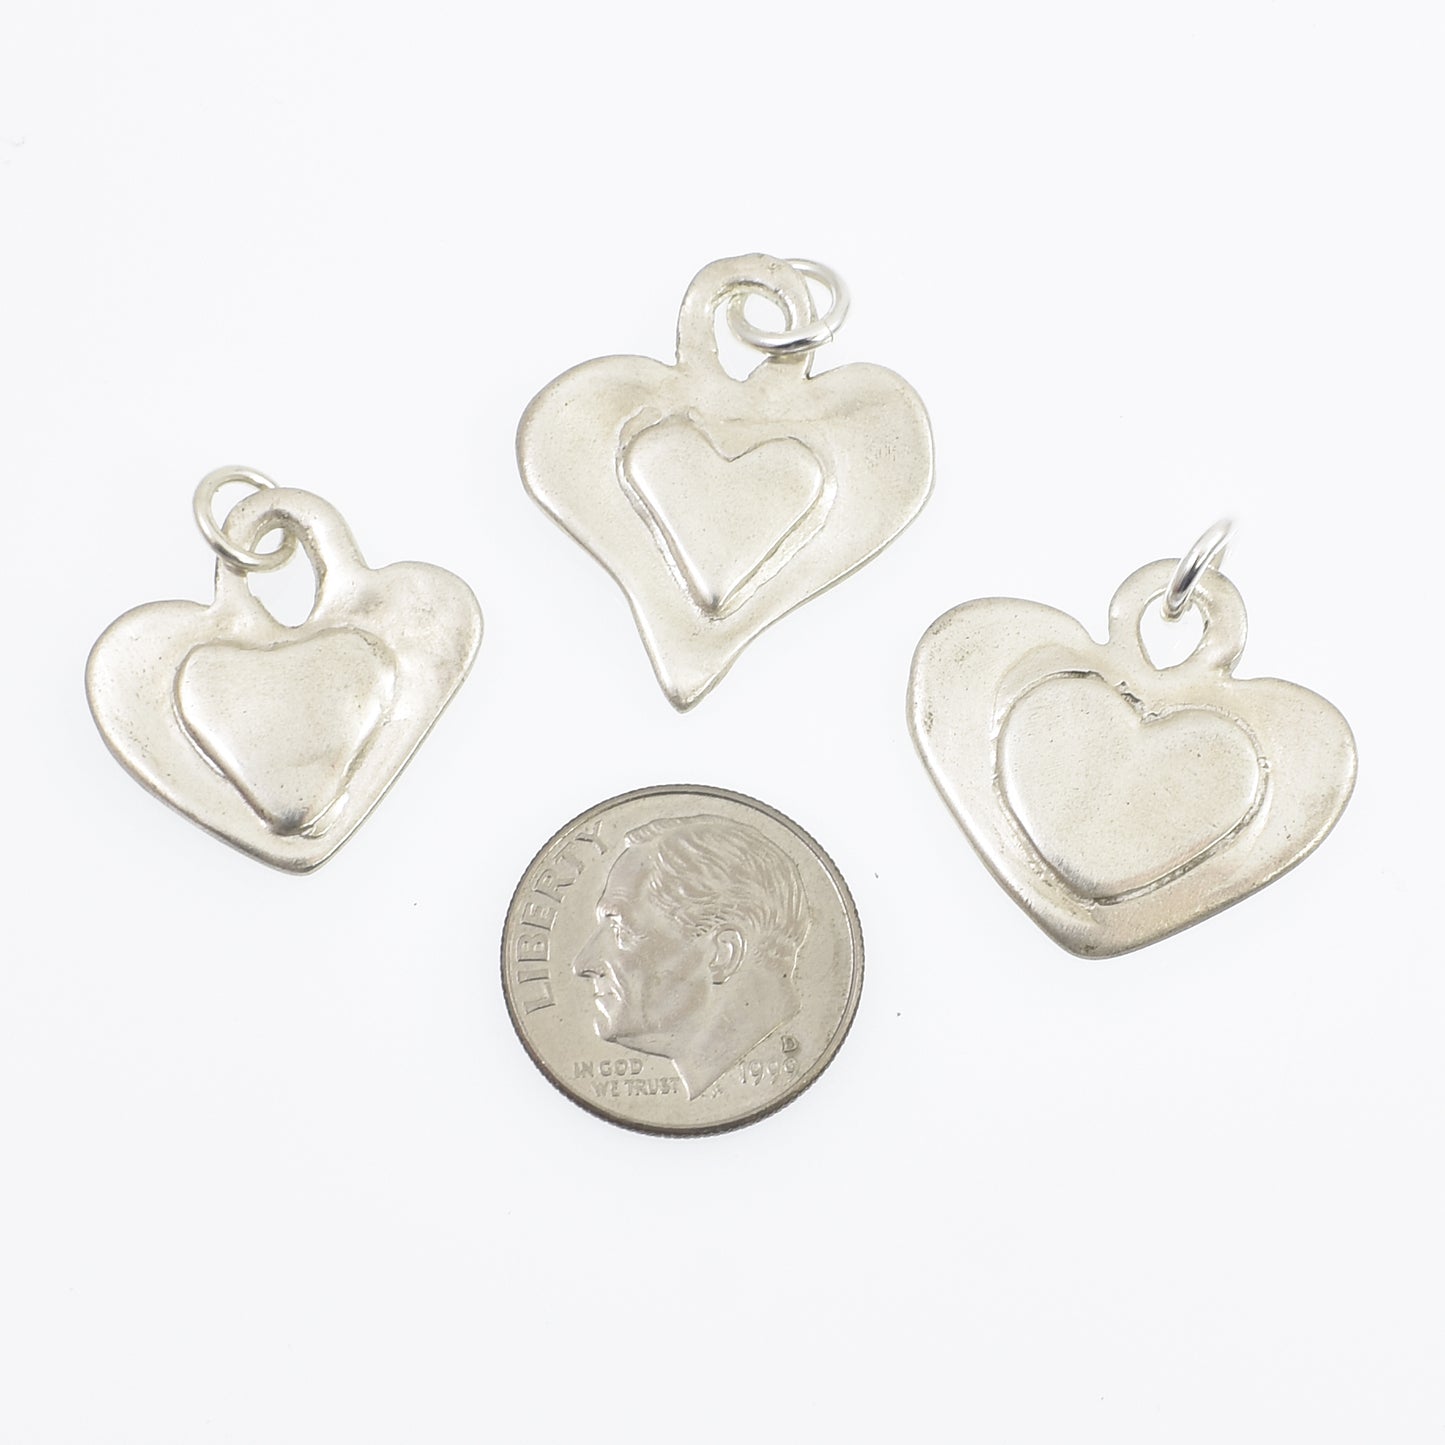 Sterling Silver Heart on Heart Charms All 3 charms next to dime for size reference